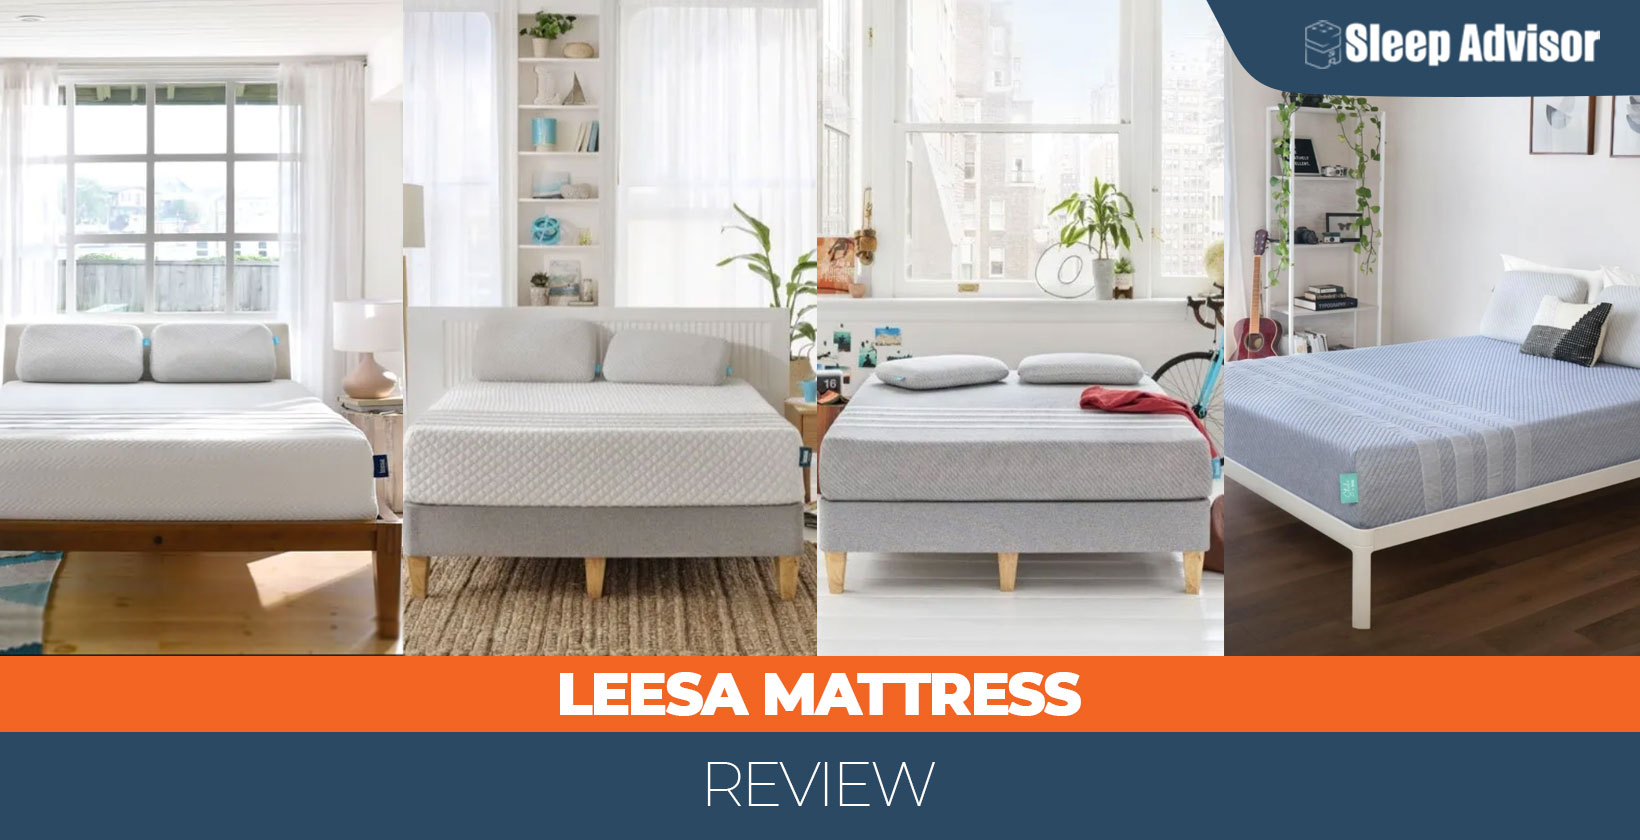 Leesa Mattress Review and Prices